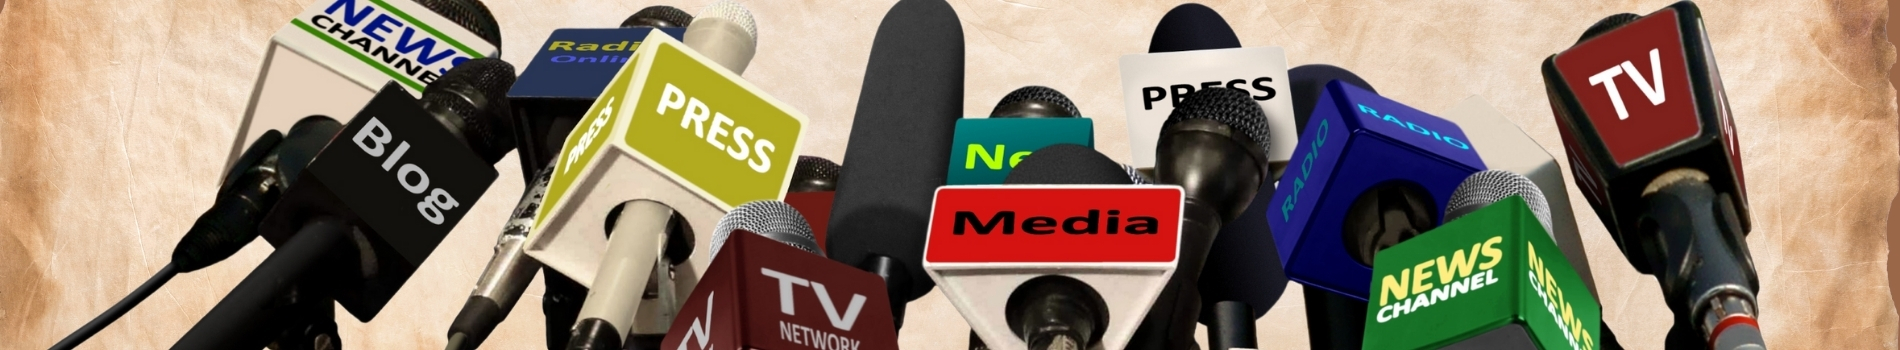 Global Media and Communication Services Abroad